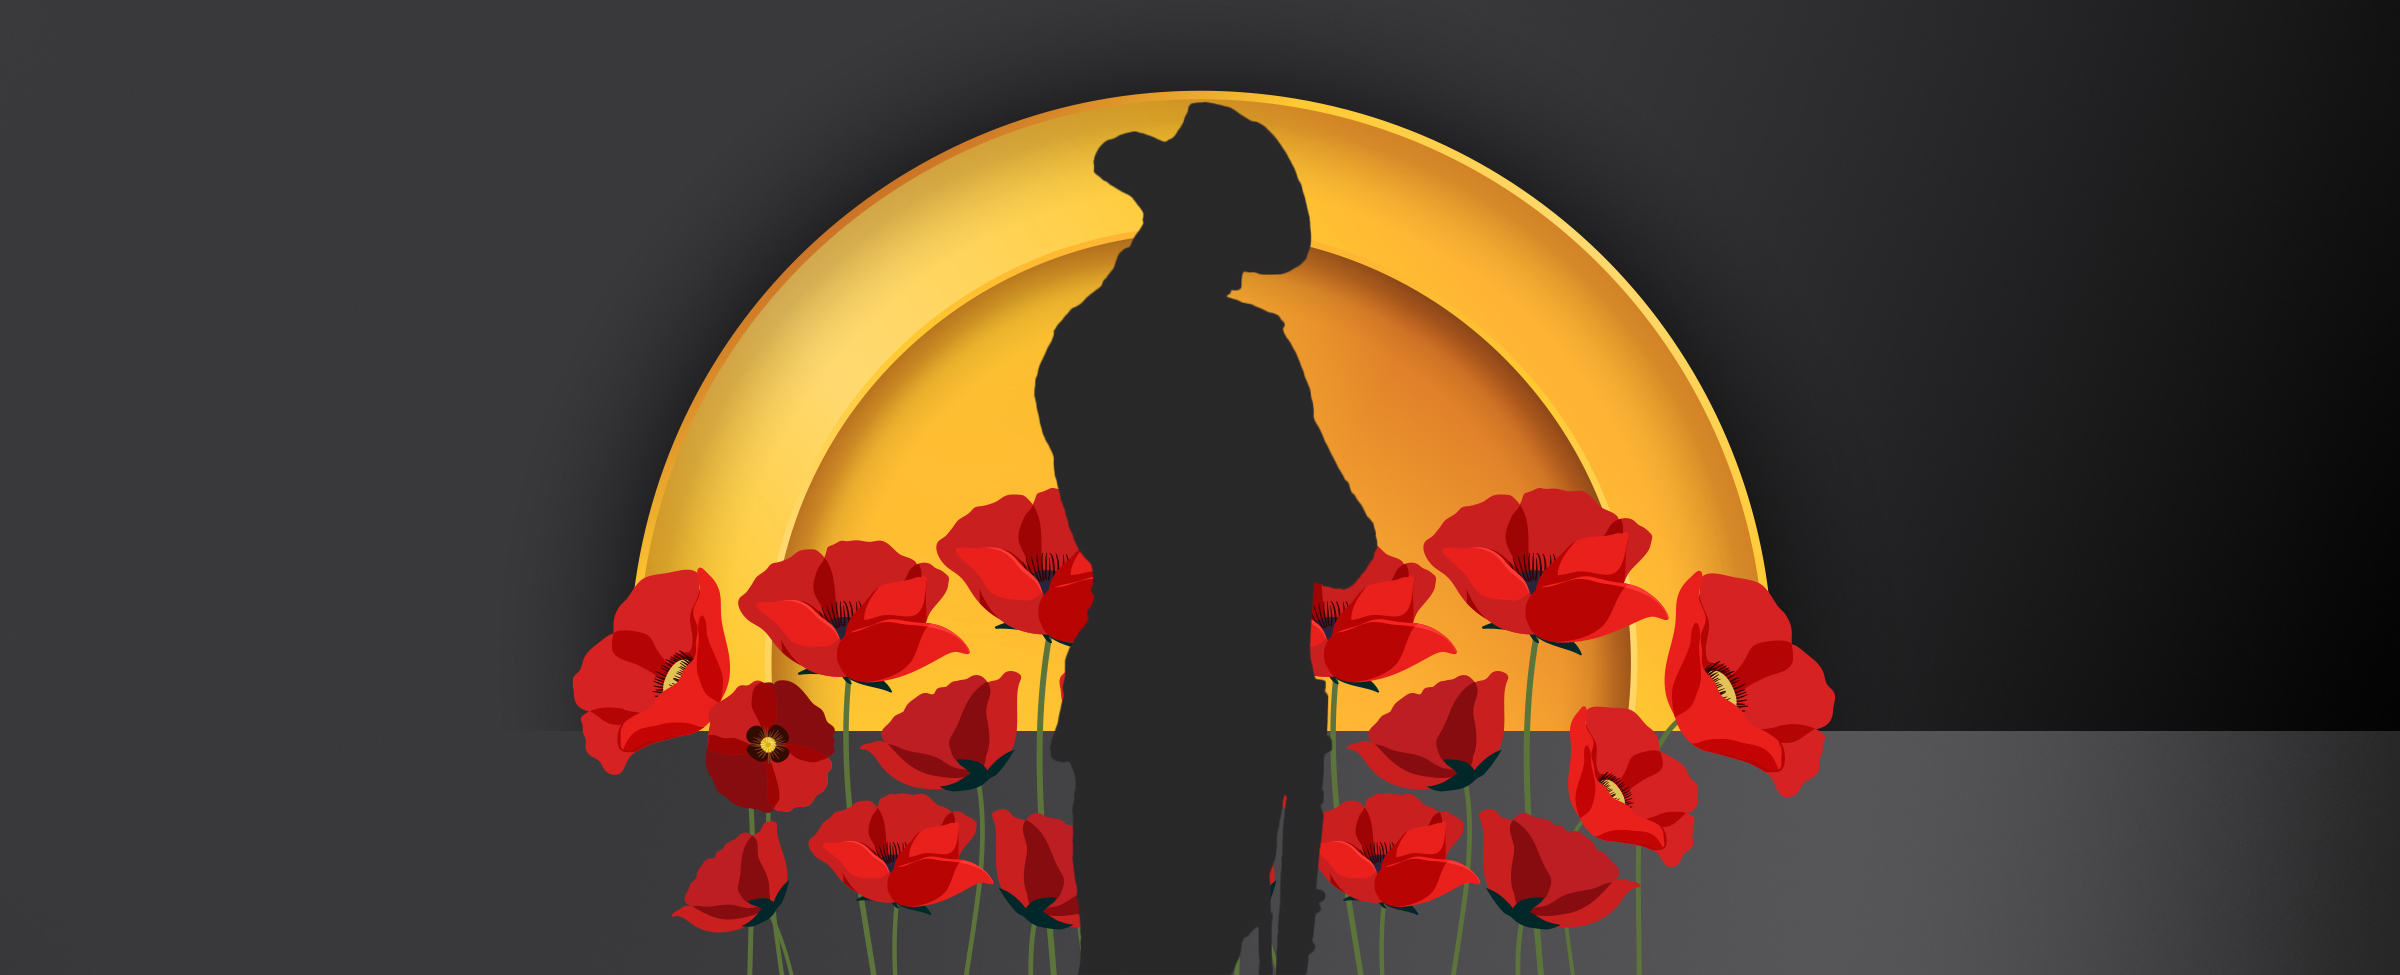 A silhouette of an Australian service personnel with head bowed is centred. Red poppies also feature on a dark background.